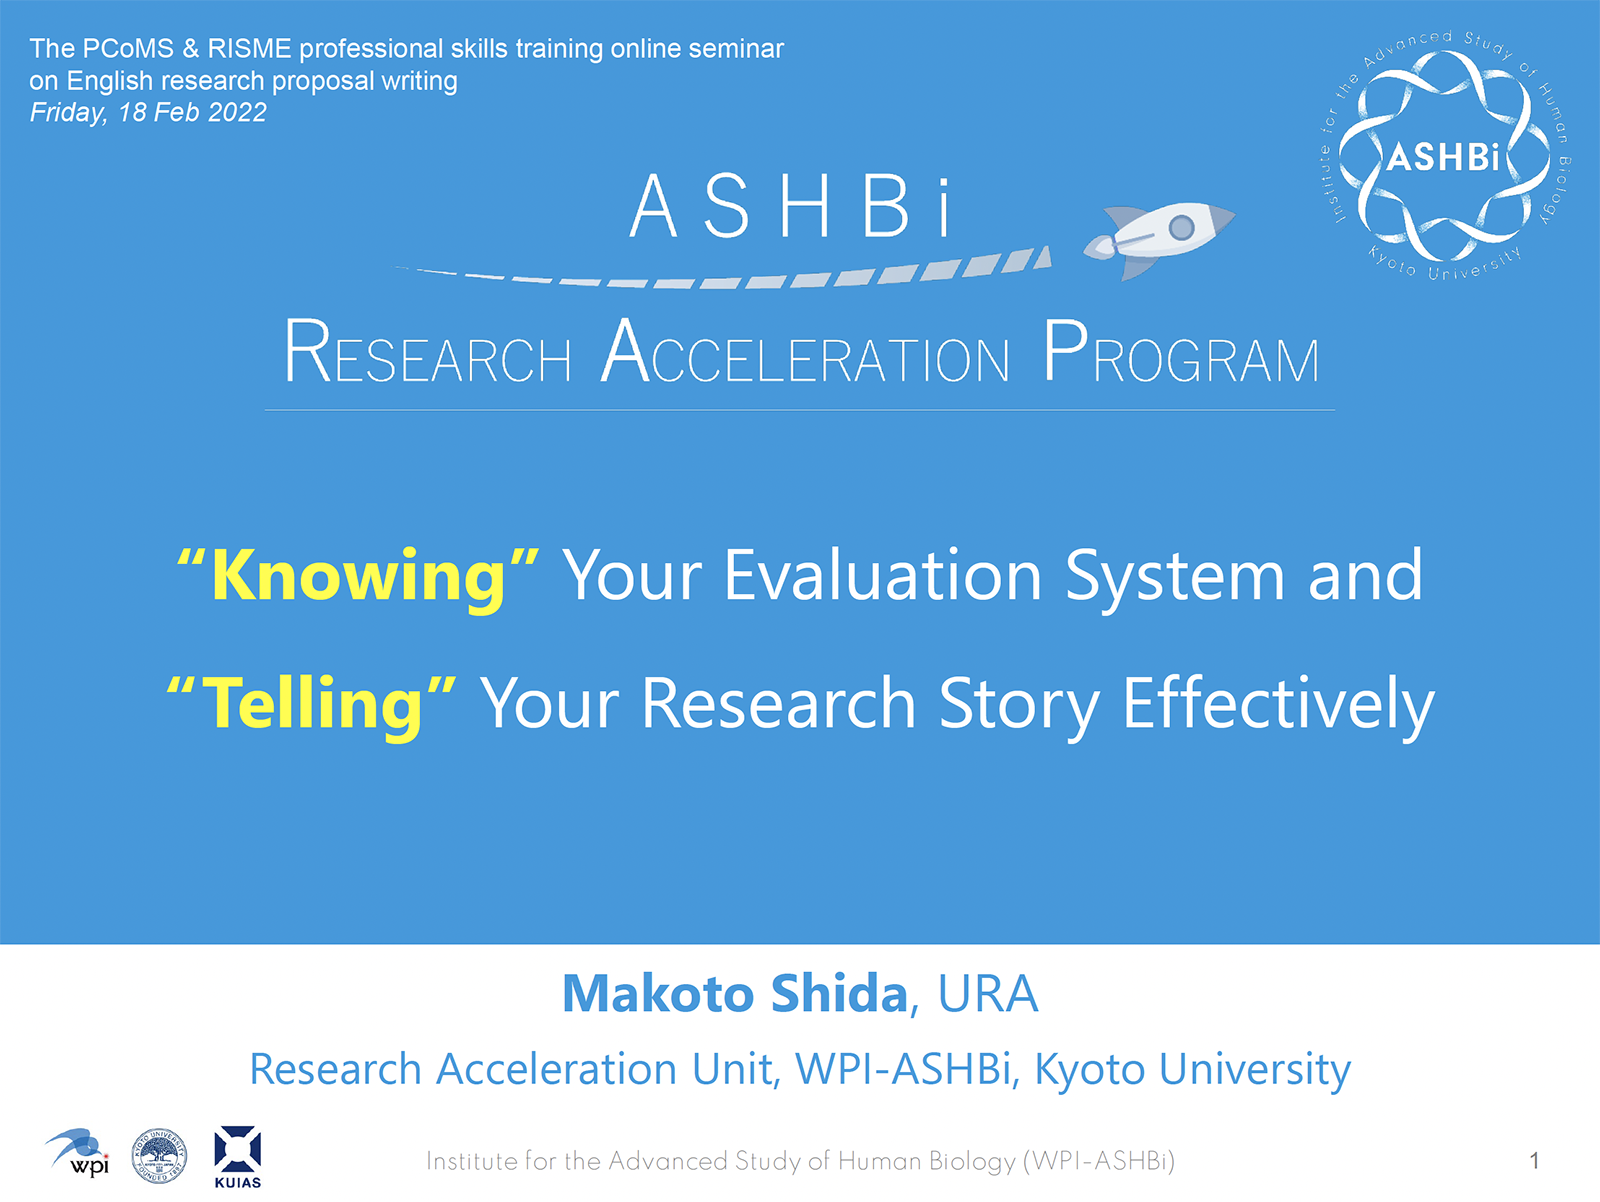 “Knowing” Your Evaluation System and “Telling” Your Research Story Effectively